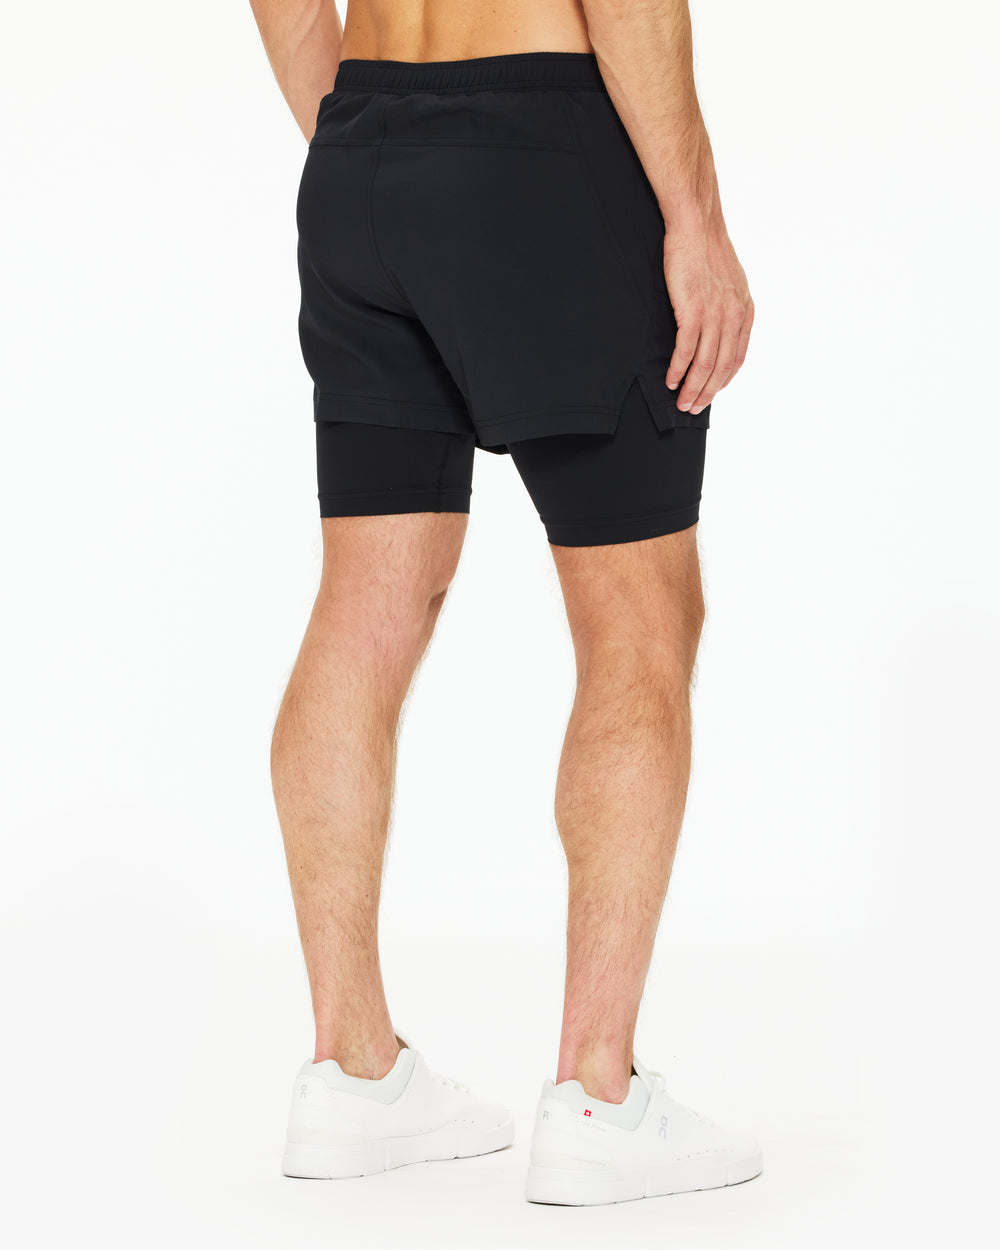 Alo Yoga Revival 2-in-1 Short 5" - Lined